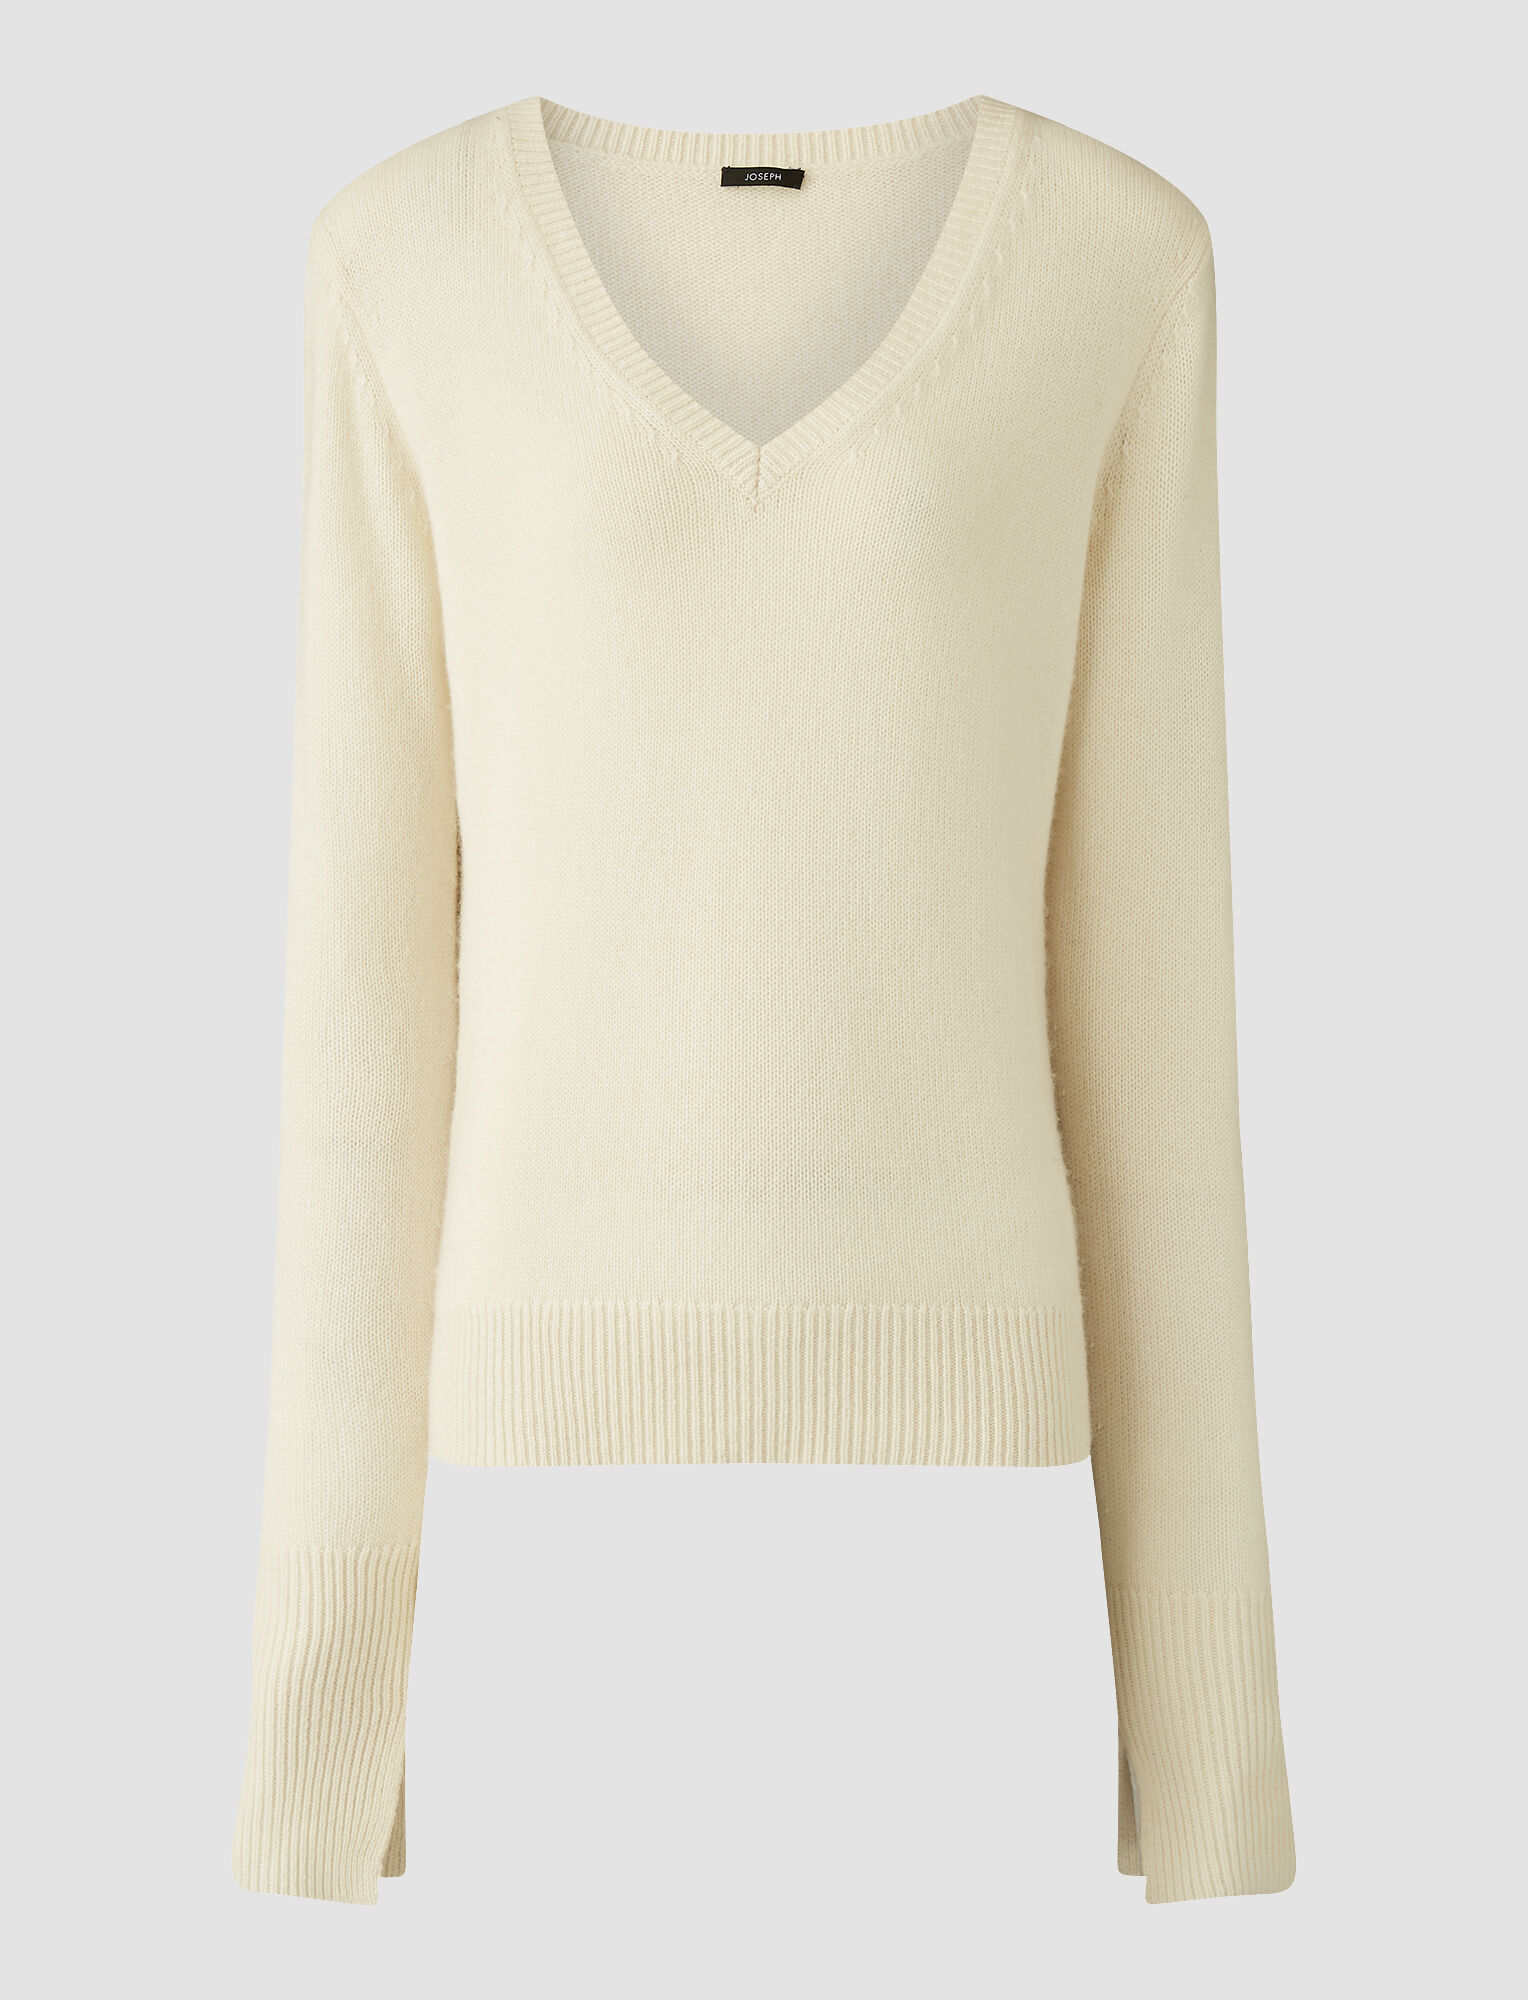 - Save 50% JOSEPH Cashmere Cashair V Neck Jumper in Almond Womens Clothing Jumpers and knitwear Jumpers Natural 